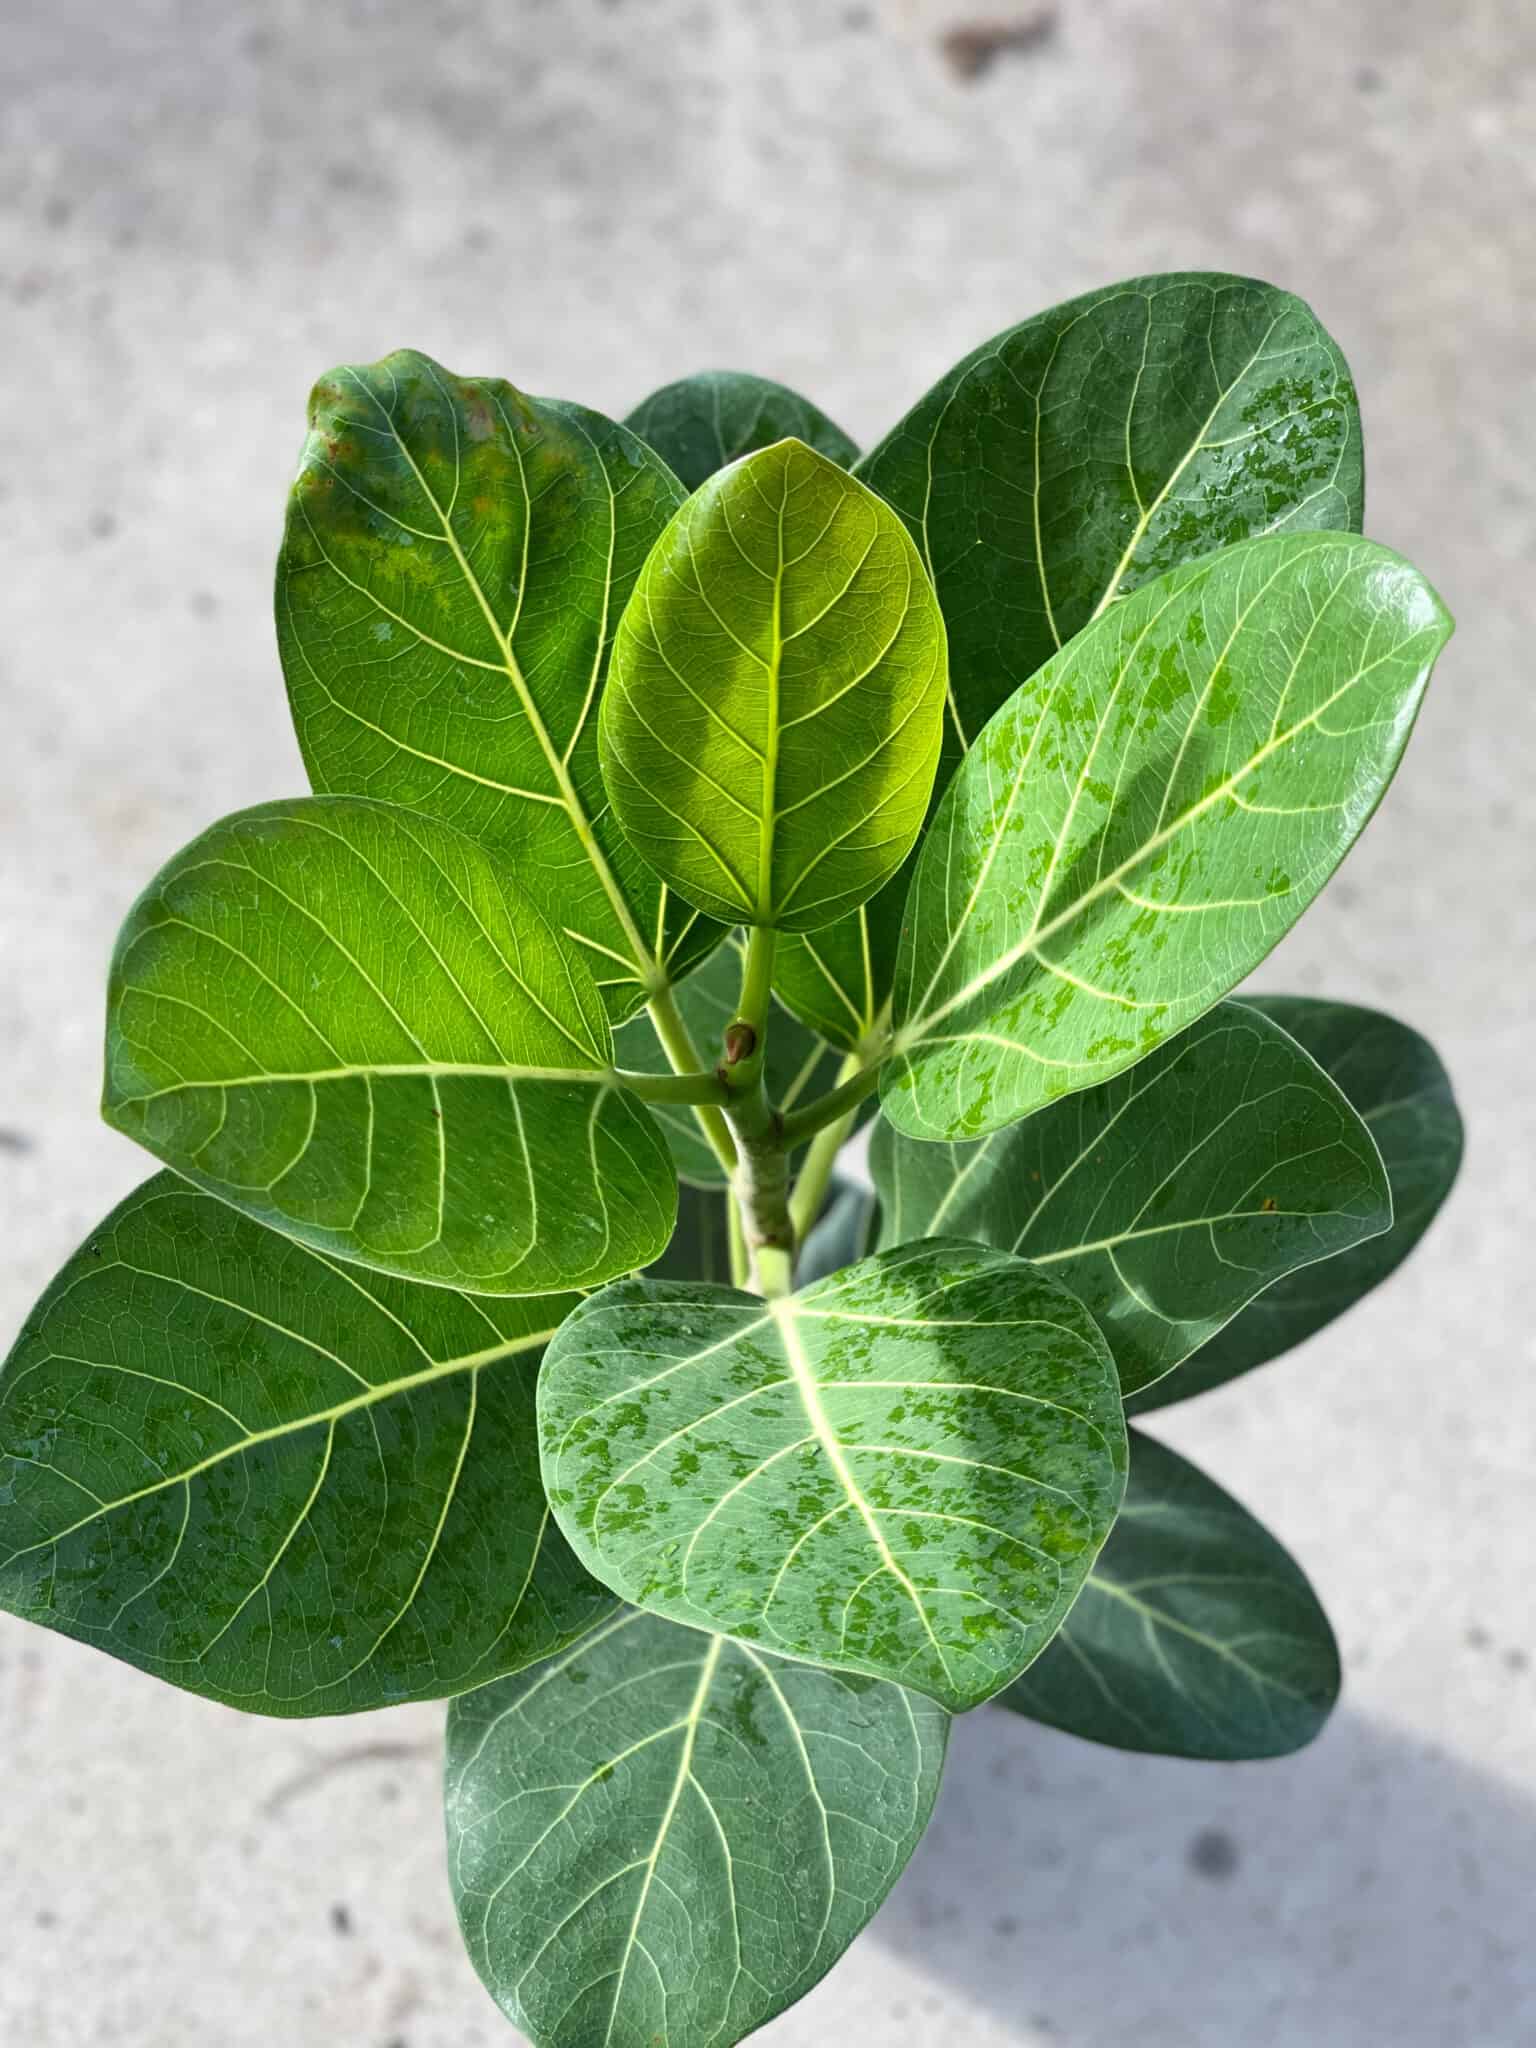 Ficus Audrey vs. Fiddle Leaf Fig: What's the Difference? - A-Z Animals